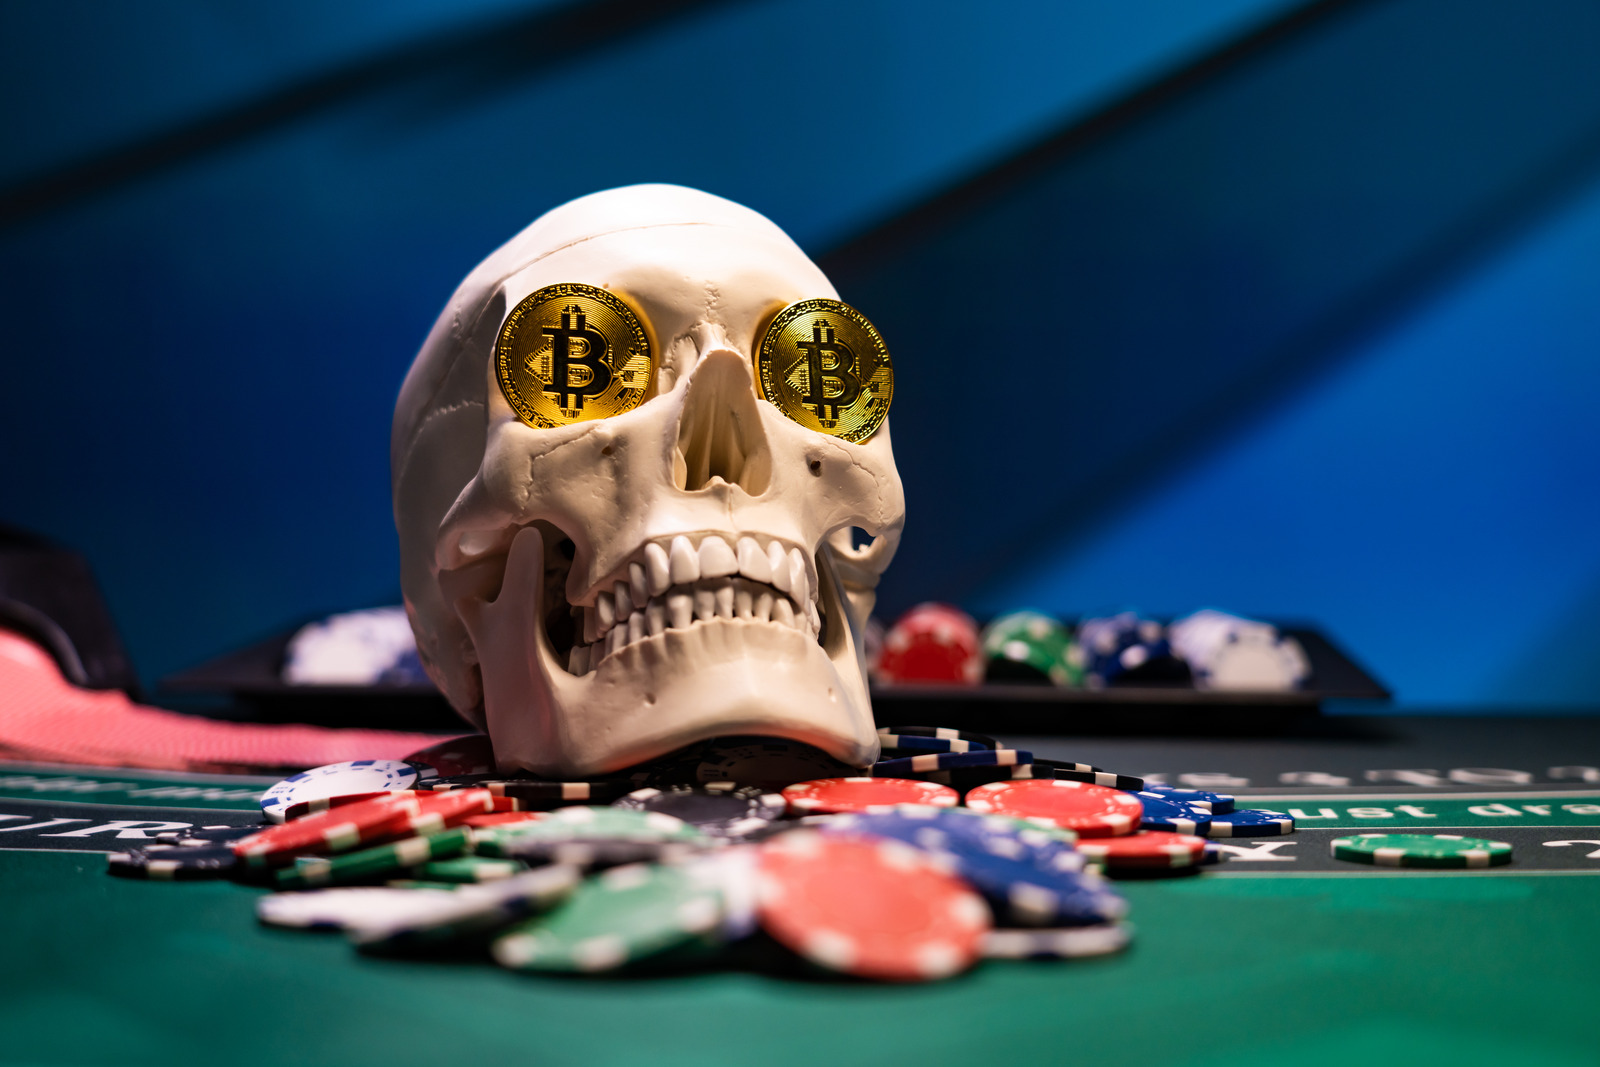 The Most Common best bitcoin casino Debate Isn't As Simple As You May Think